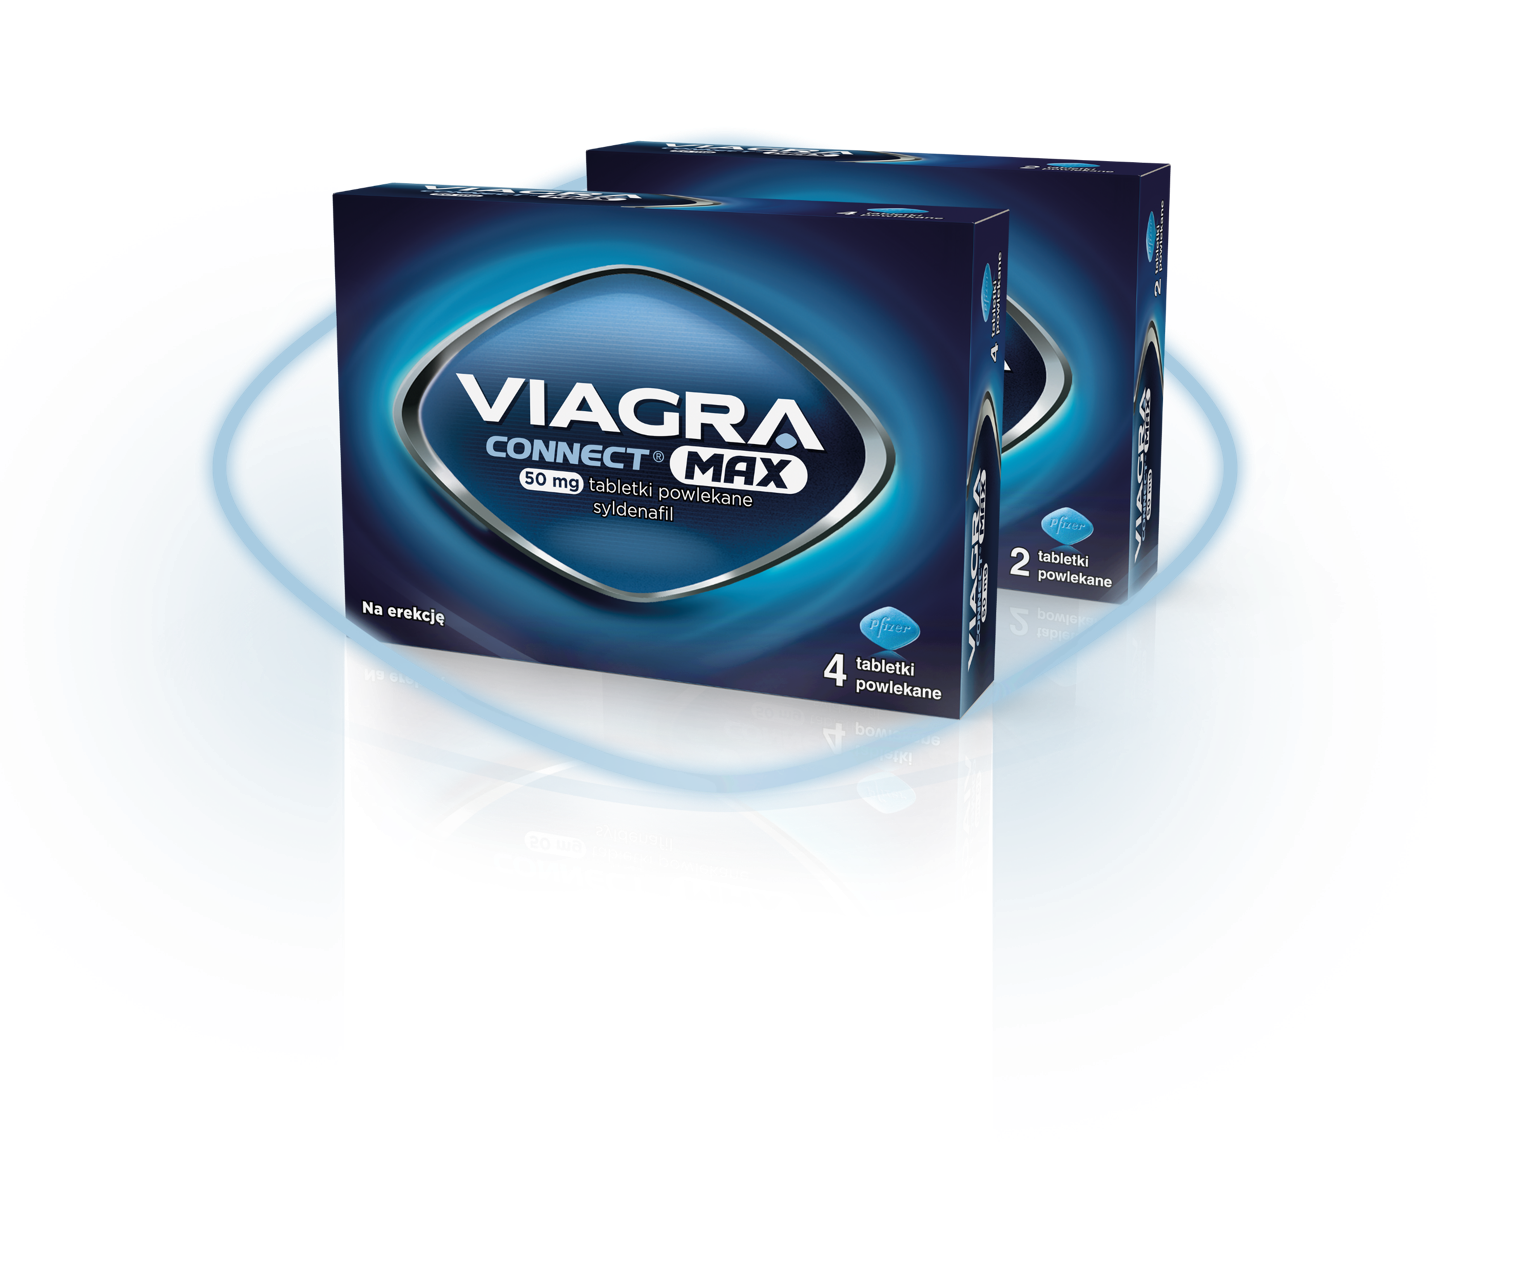 viagra connect max product